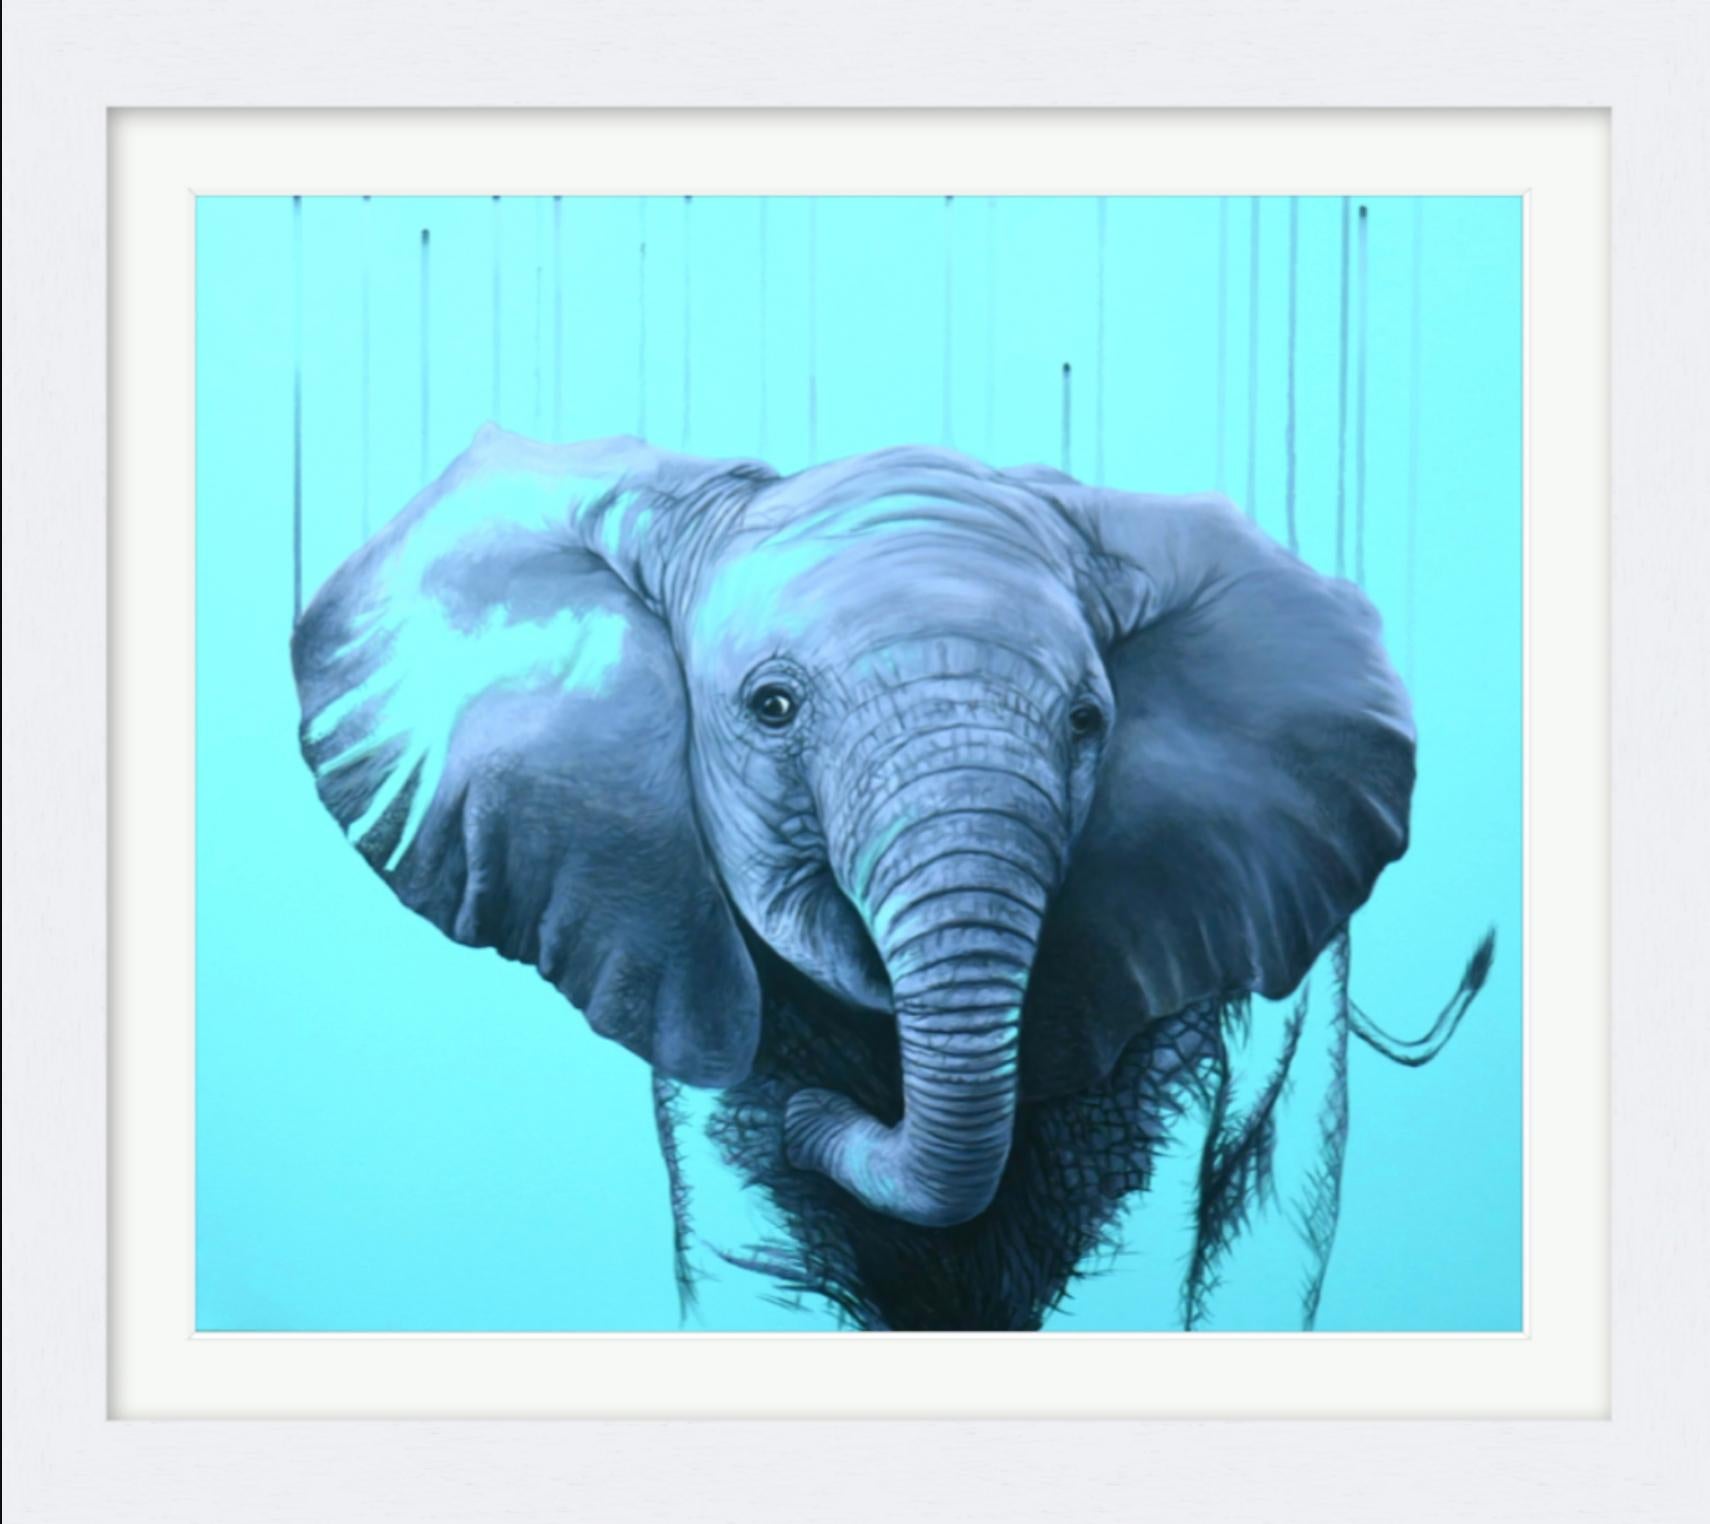 You are a Star by Louise McNaught - Blue Pop Elephant Animal Contemporary Print 1